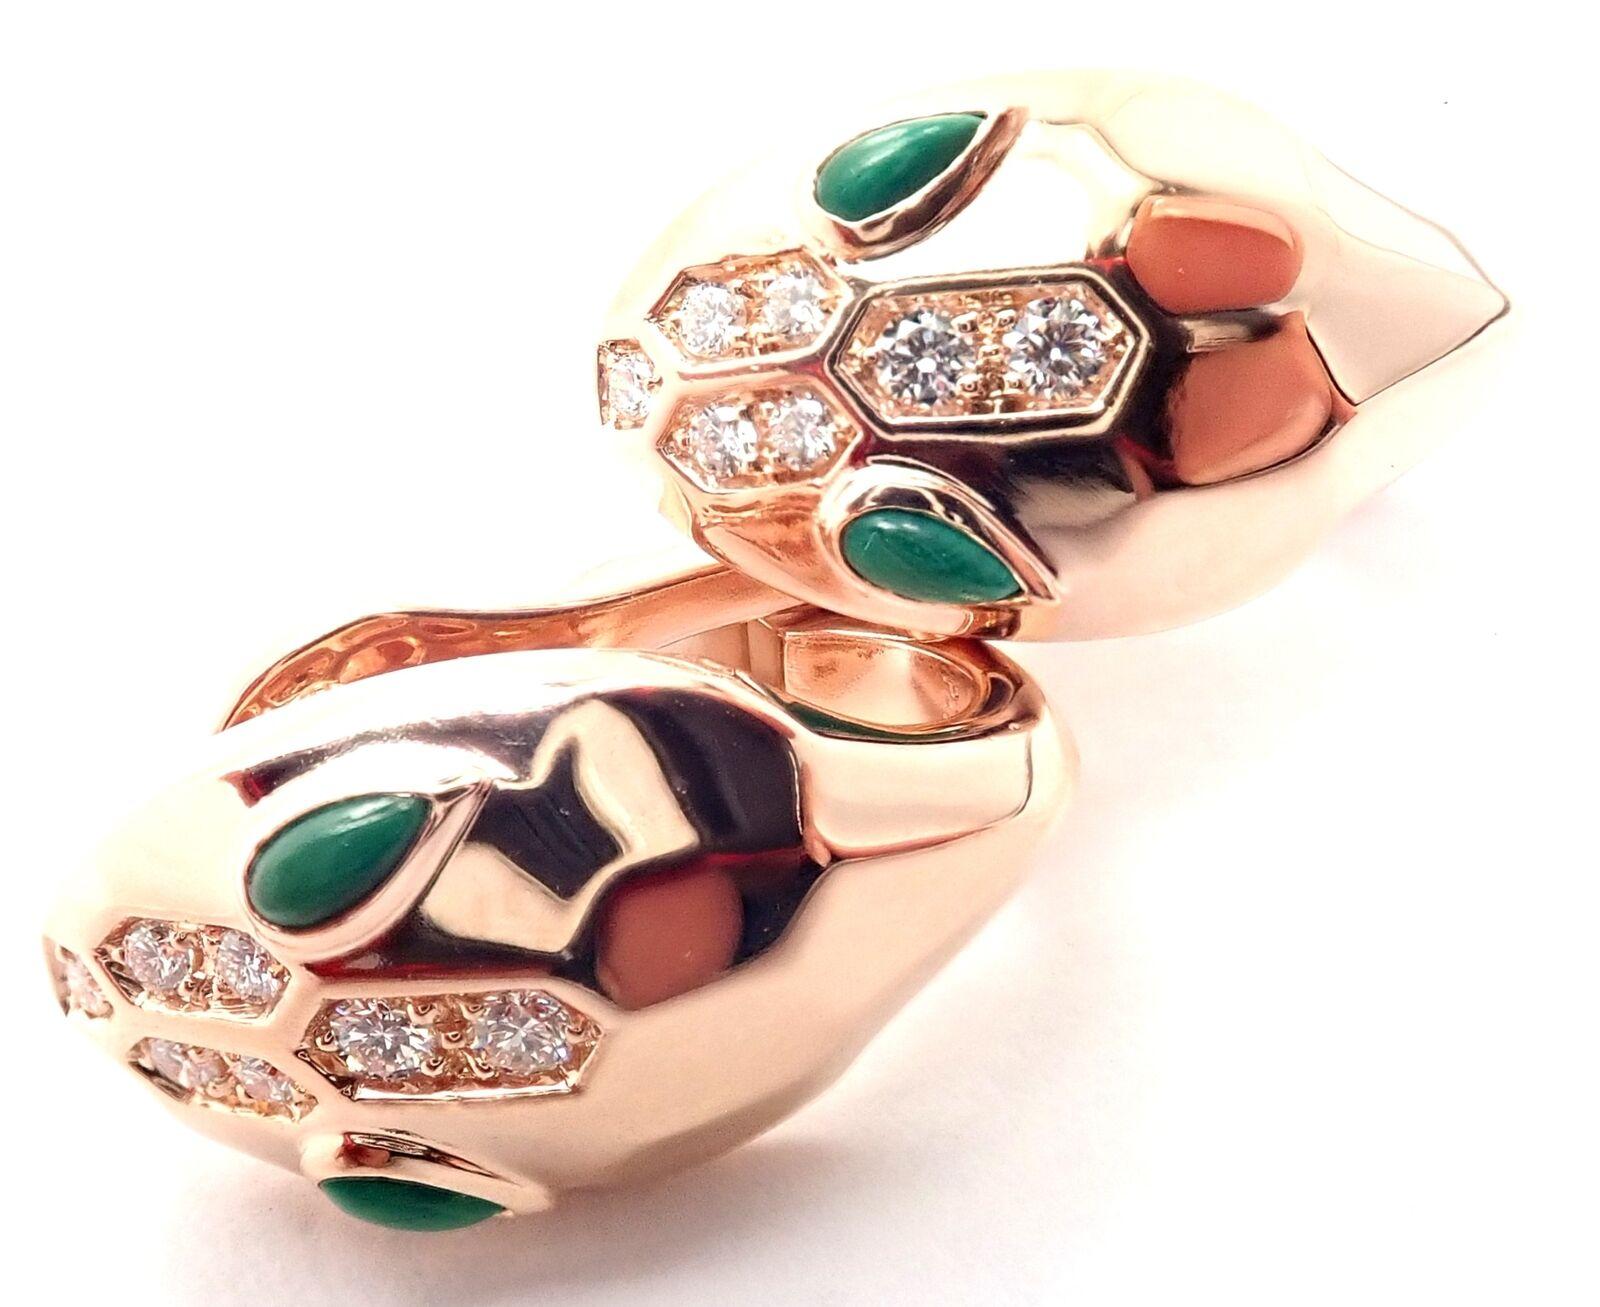 18k Rose Gold Diamond Malachite Serpenti Earrings by Bulgari. 
With 14x round brilliant cut diamonds VS1 clarity, G color total weight approx. .42ctw
4 malachite stones.
These earrings come with Bulgari Box.
These earrings are for pierced